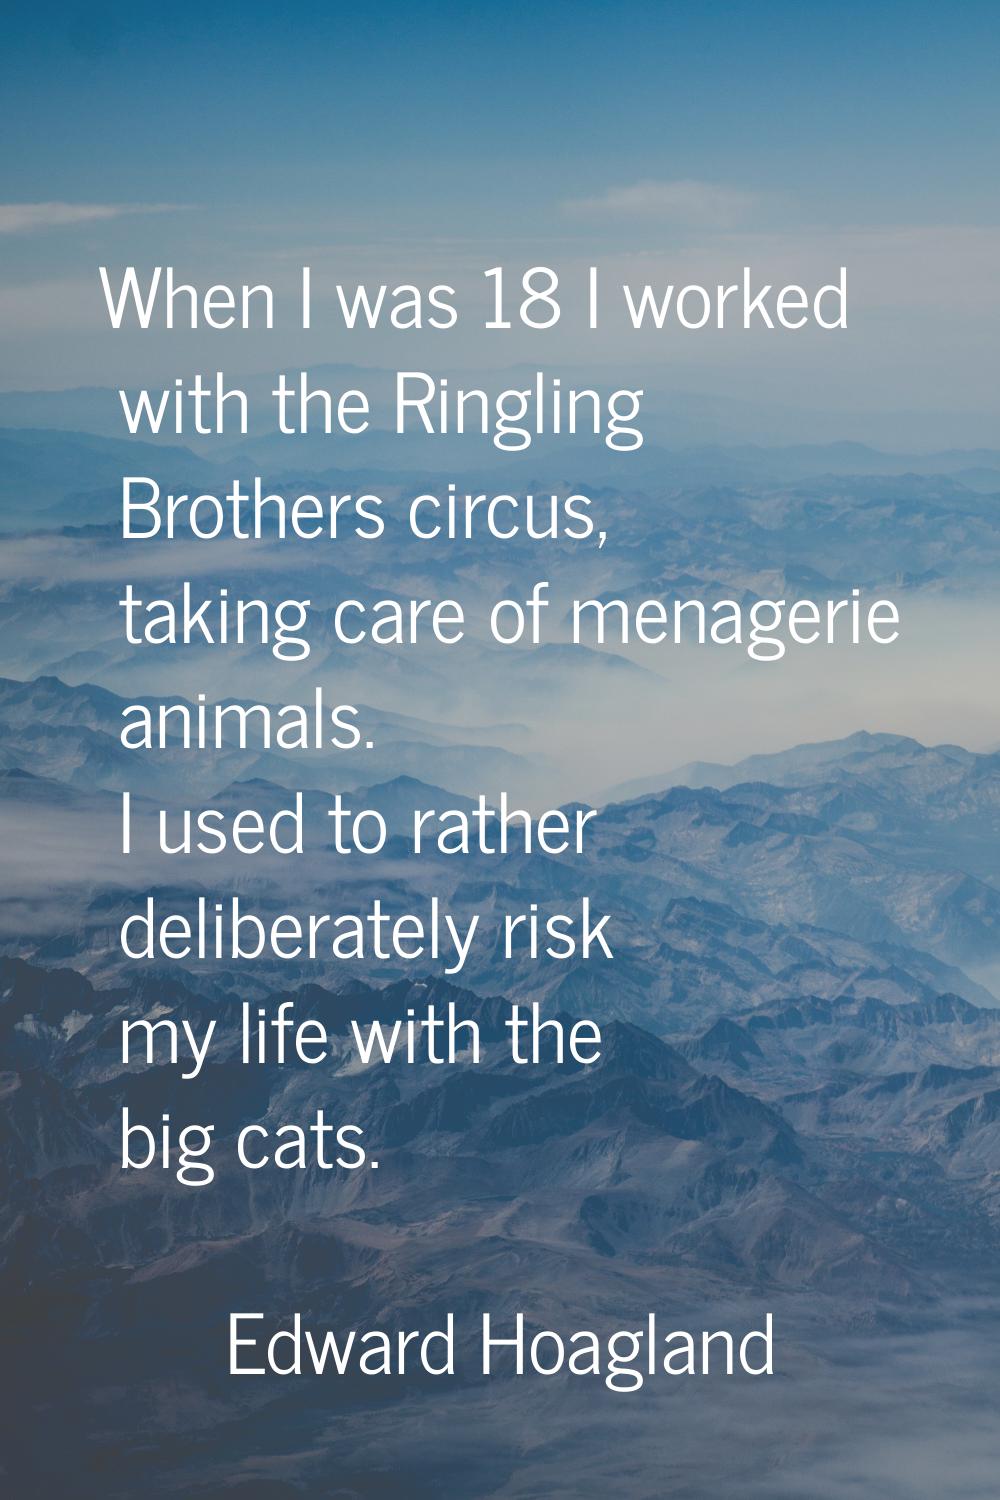 When I was 18 I worked with the Ringling Brothers circus, taking care of menagerie animals. I used 